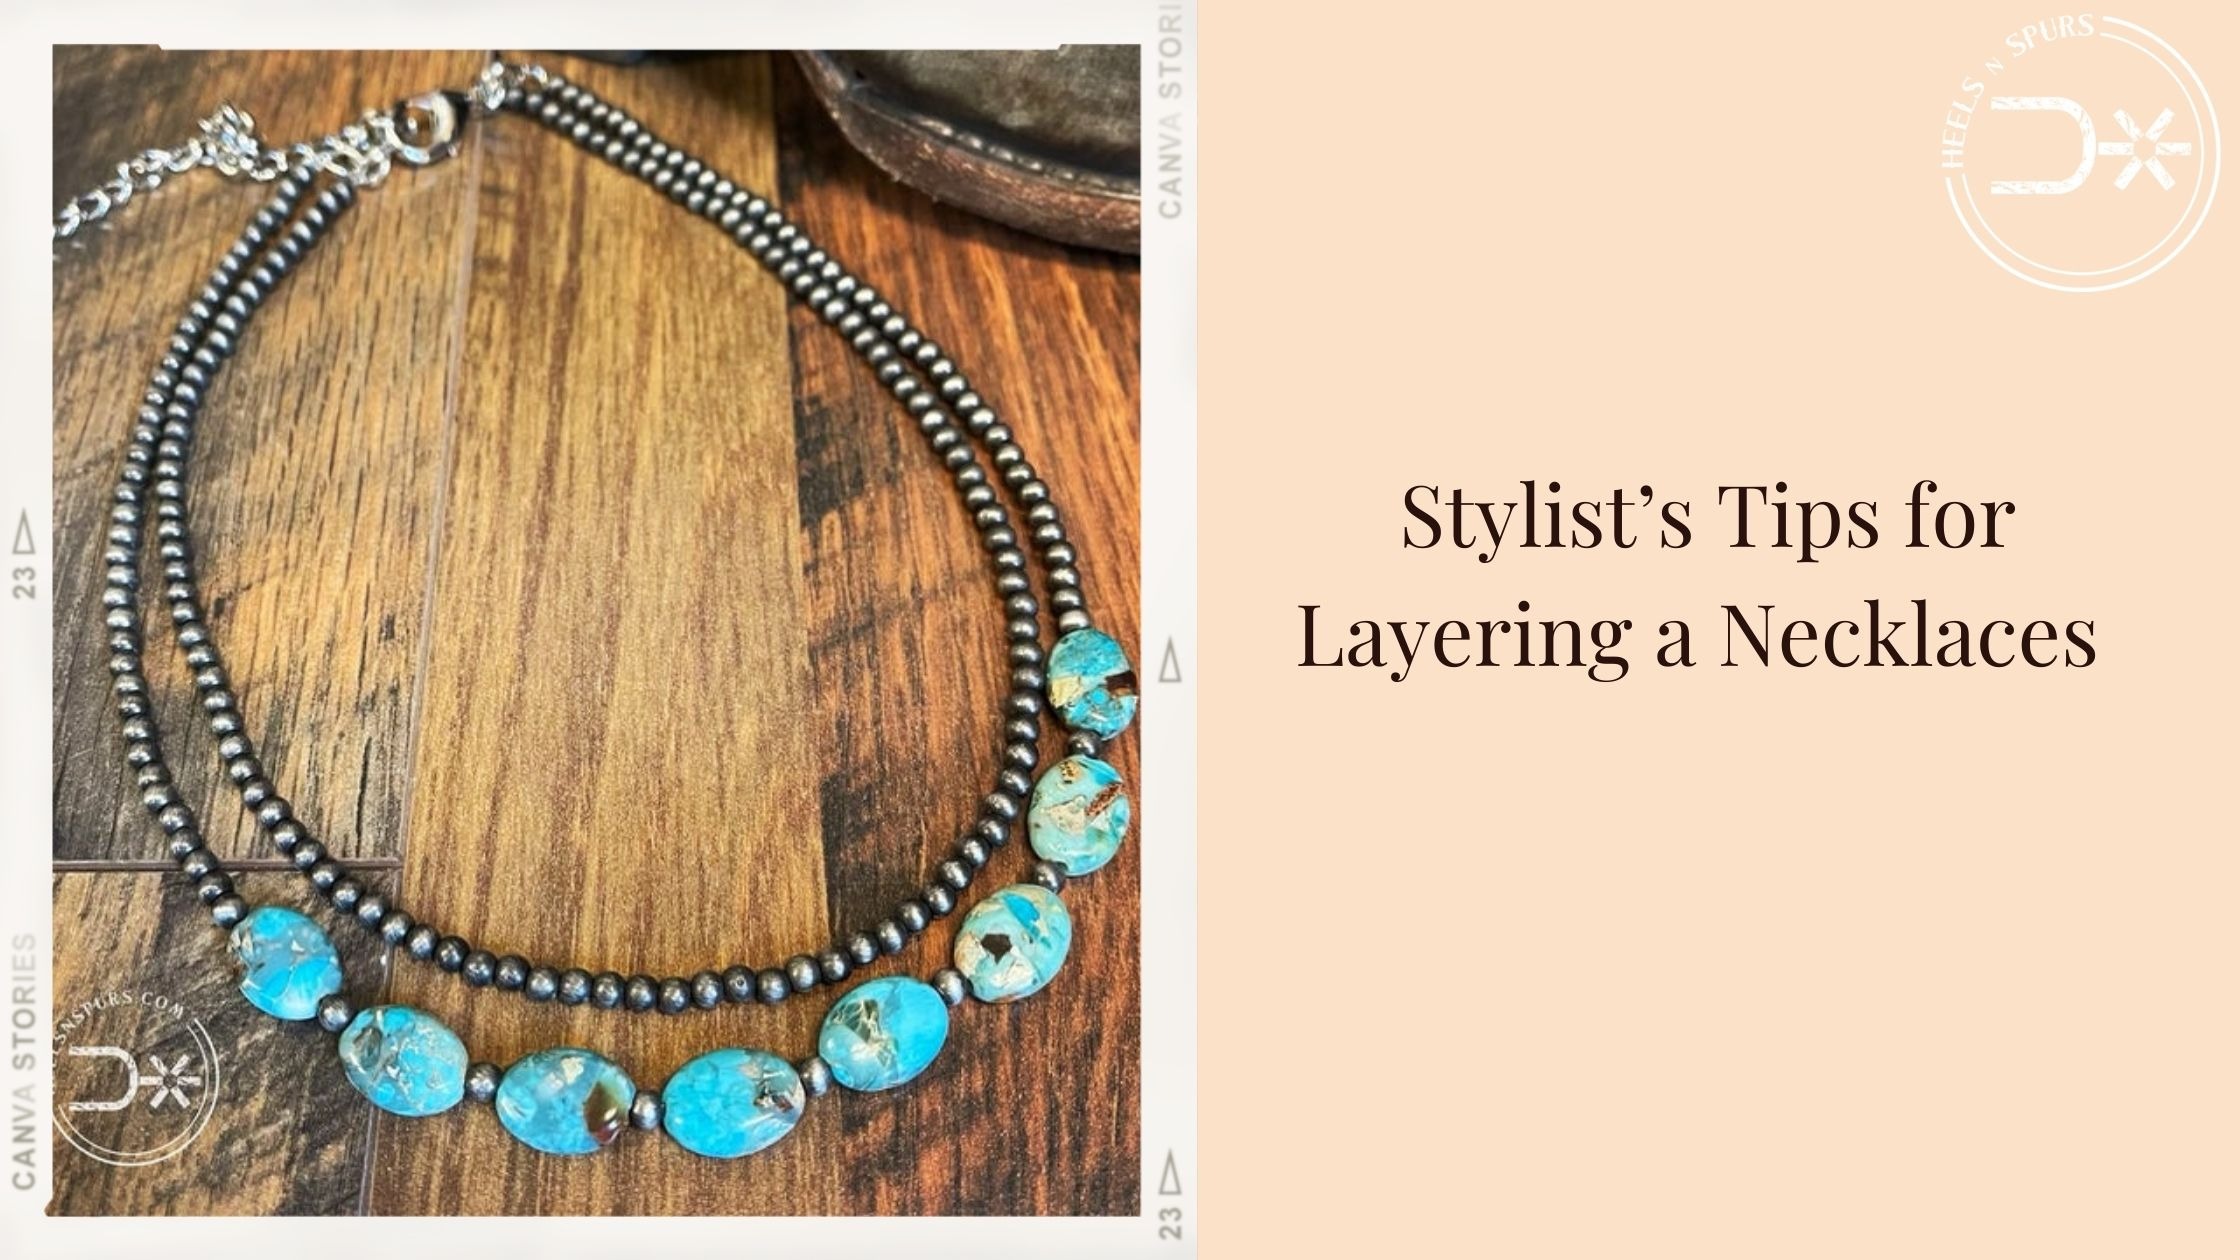 Stylist’s Tips for Layering a Necklaces  – Telegraph